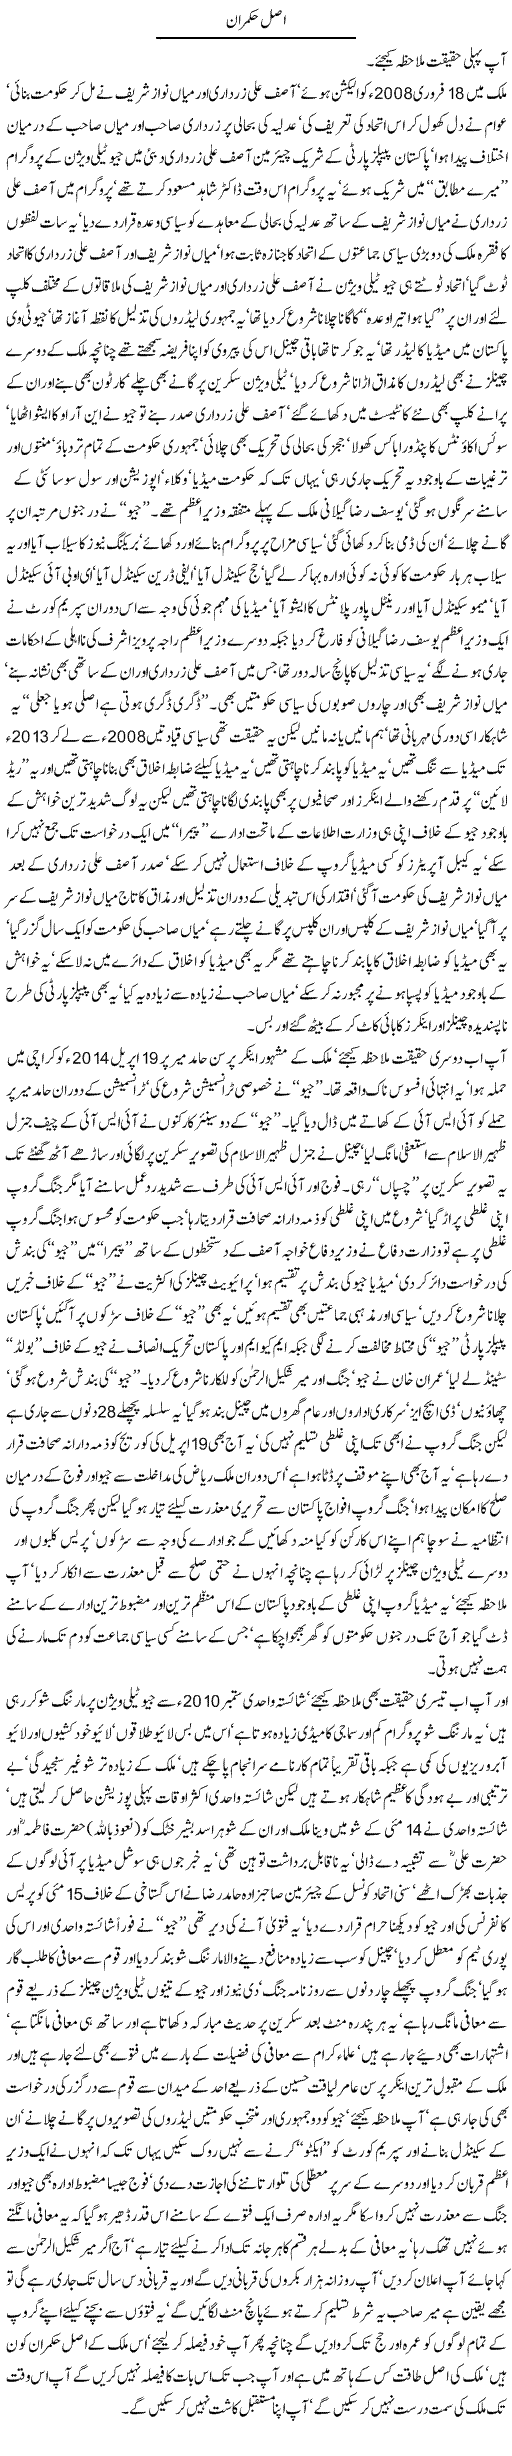 JAVED CHAUDHRY COLUMN ABOUT GEO NEWS & POWER OF FATWA